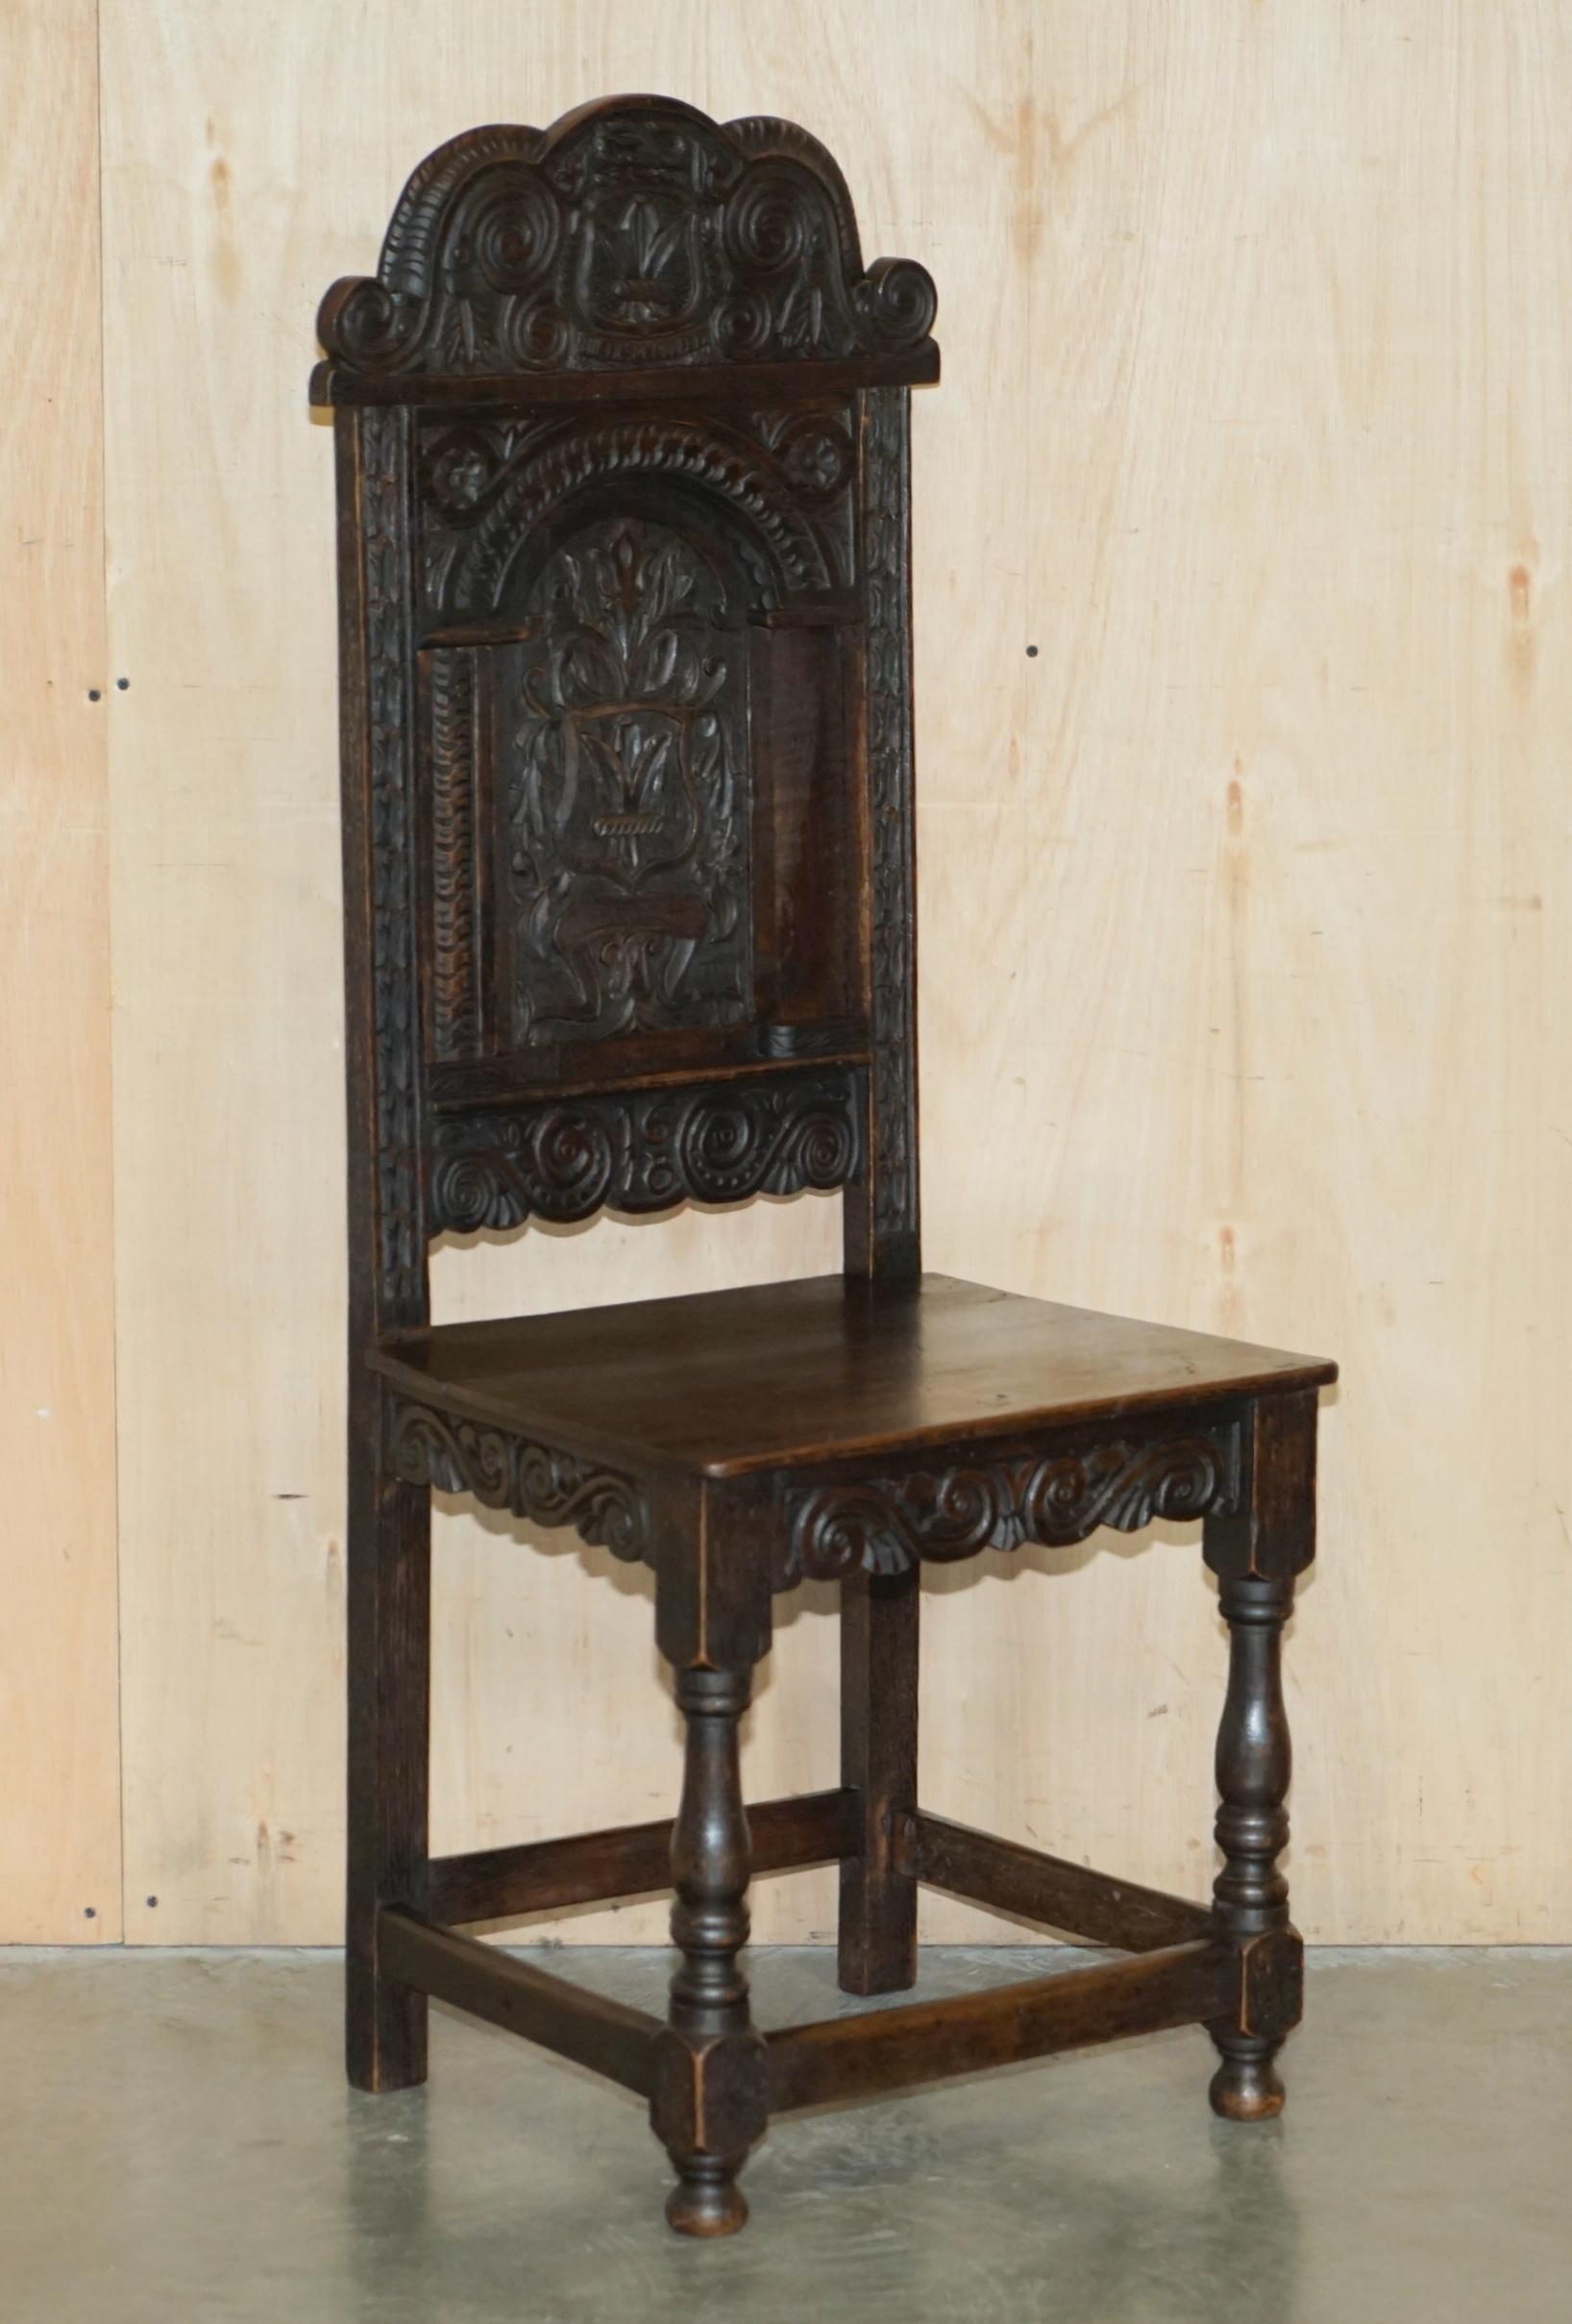 ANTIQUE PAIR OF 17TH CENTURY JACOBEAN ENGLISH OAK CHAIRS FROM THE FILM HELLBOy im Angebot 10